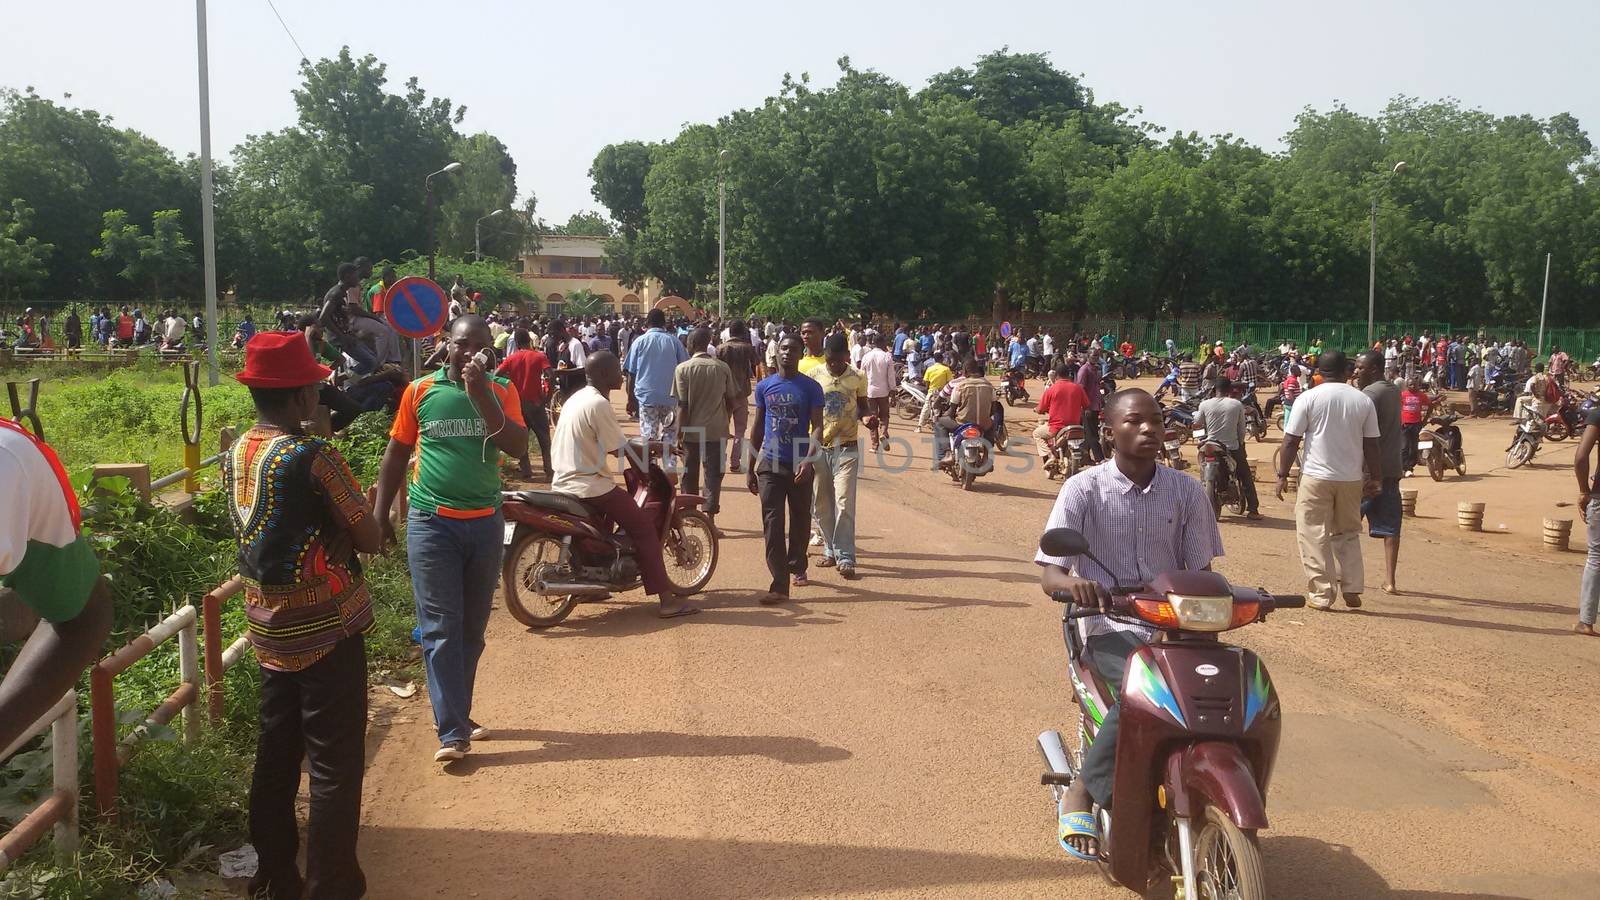 BURKINA FASO, Ouagadougou : Residents rally along a street in Ouagadougou on September 17, 2015, after Burkina Faso's presidential guard declared a coup, a day after seizing the interim president and senior government members, as the country geared up for its first elections since the overthrow of longtime leader Blaise Compaore.